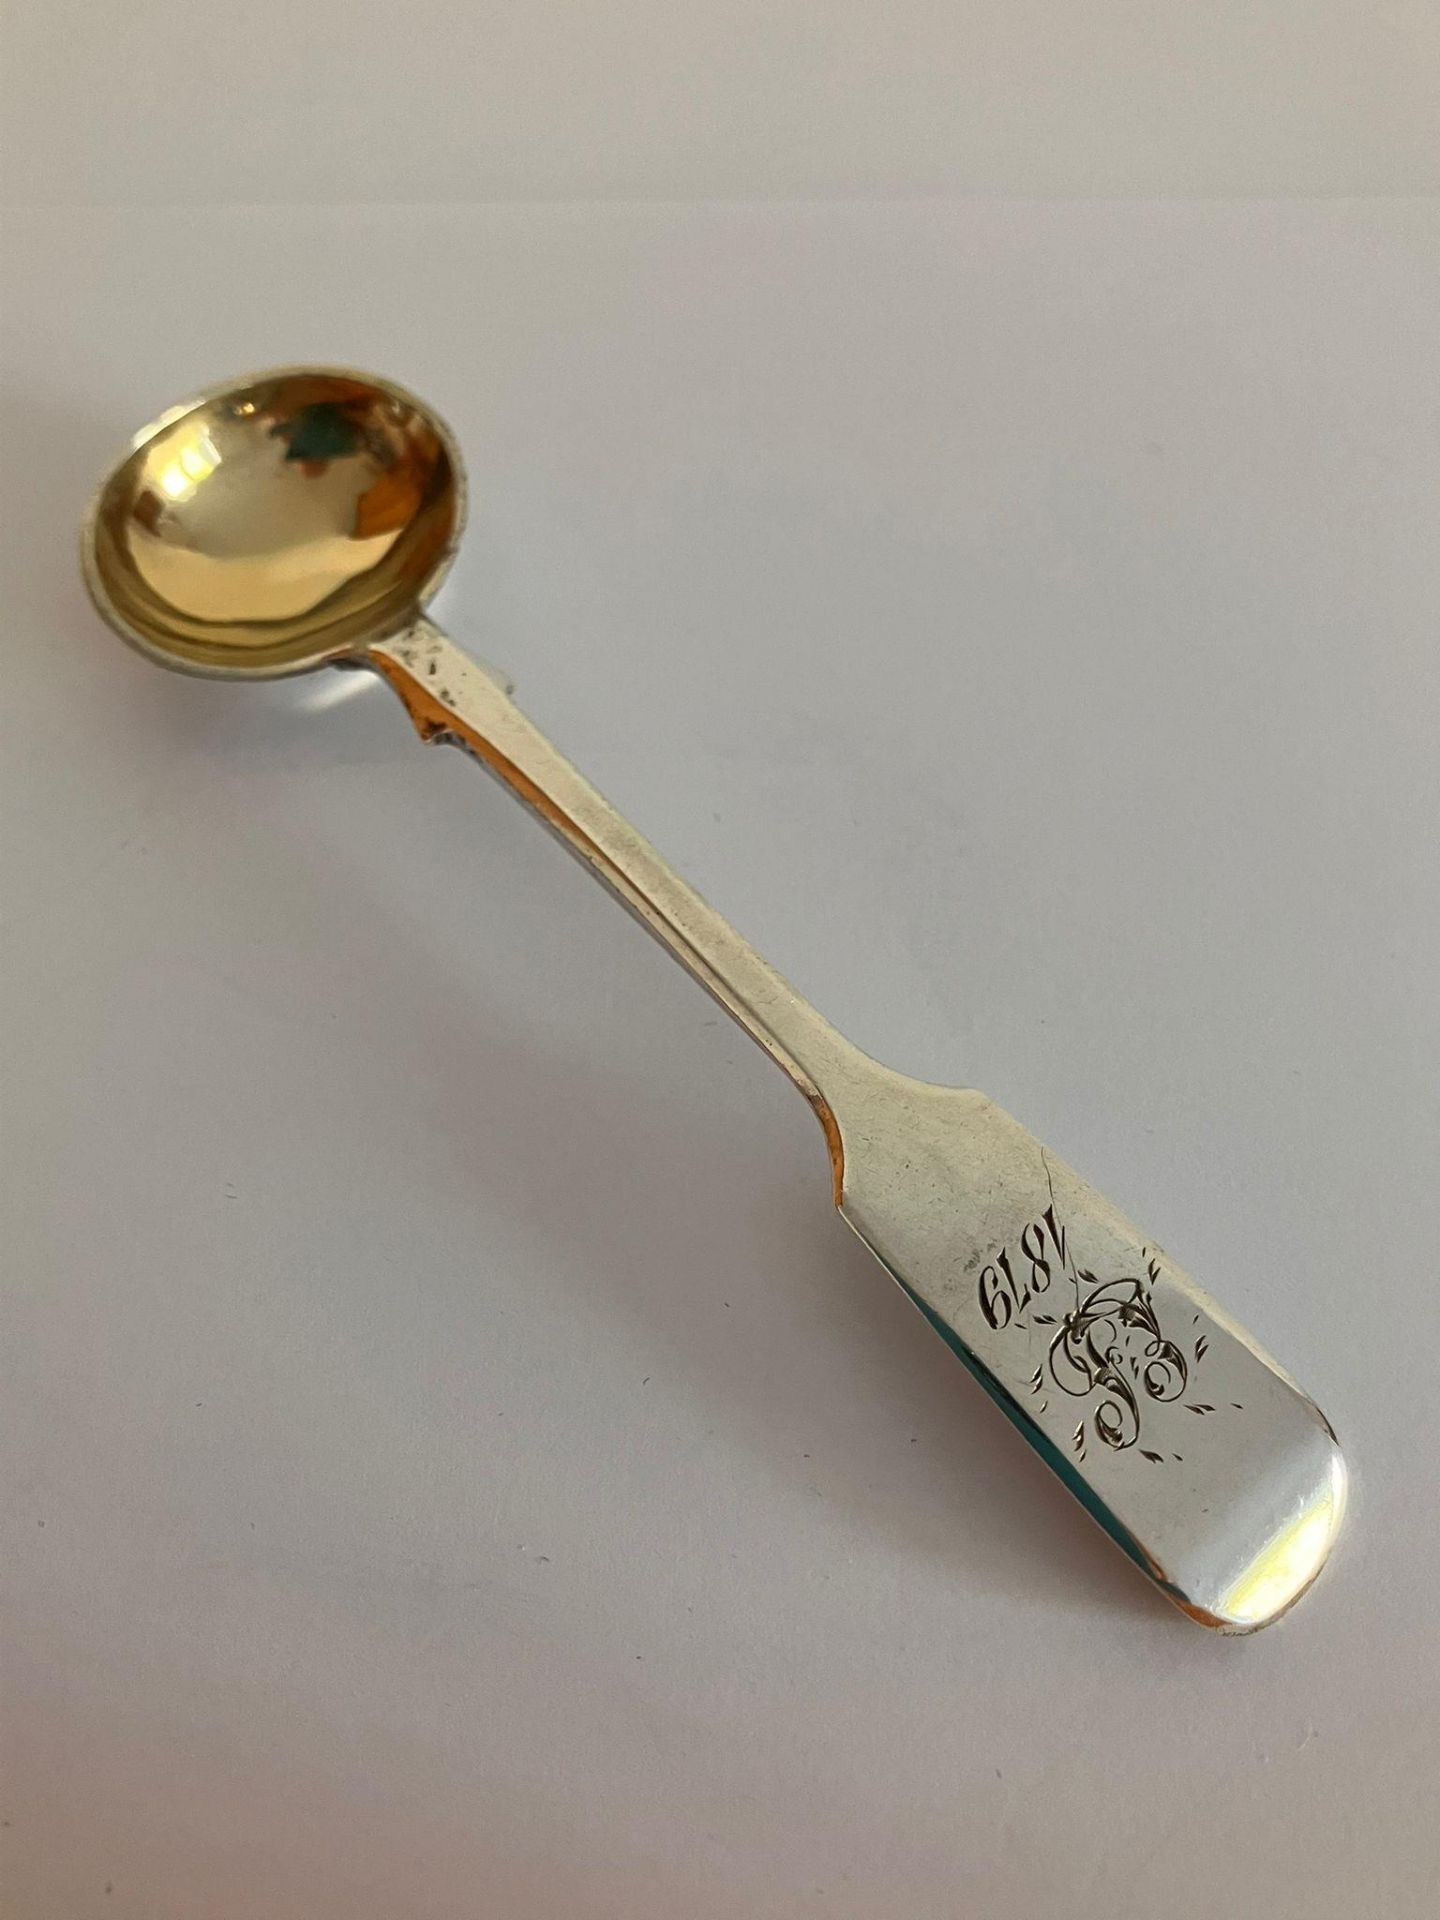 Antique SILVER CONDIMENT SPOON with Gilded Bowl. Clear Hallmark for John Stone, Exeter 1854. - Image 6 of 7